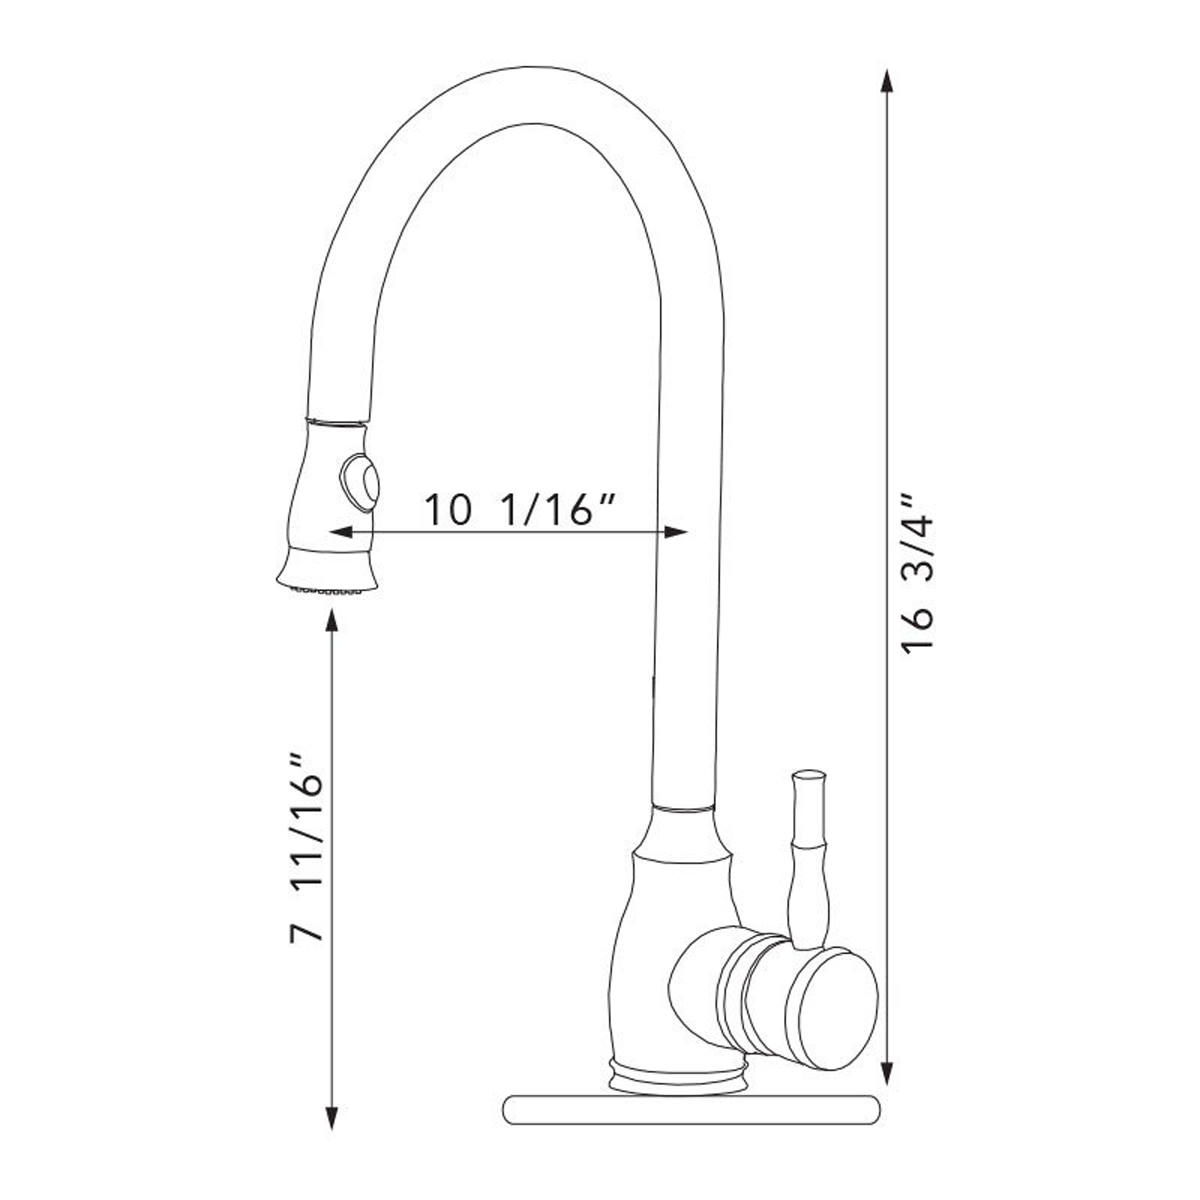 Pelican Int'l Fountain Series PL-8217 Single Hole Pull Down Kitchen Faucet In Brushed Nickel